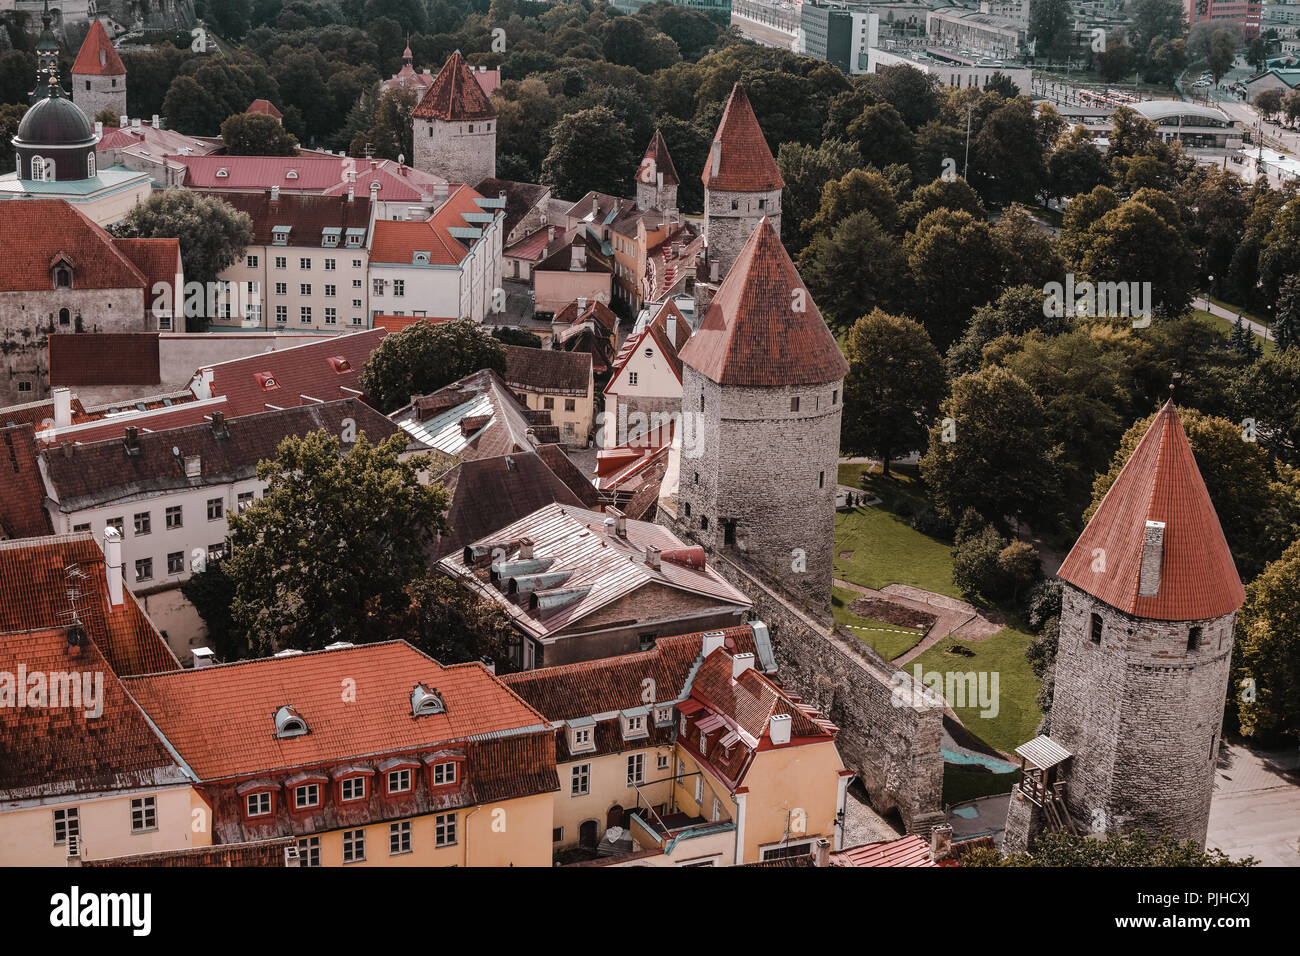 A view of the Old Town in Tallinn, Estonia. Its medieval architecture mixes with the other parts of the city in a beautiful way. Stock Photo